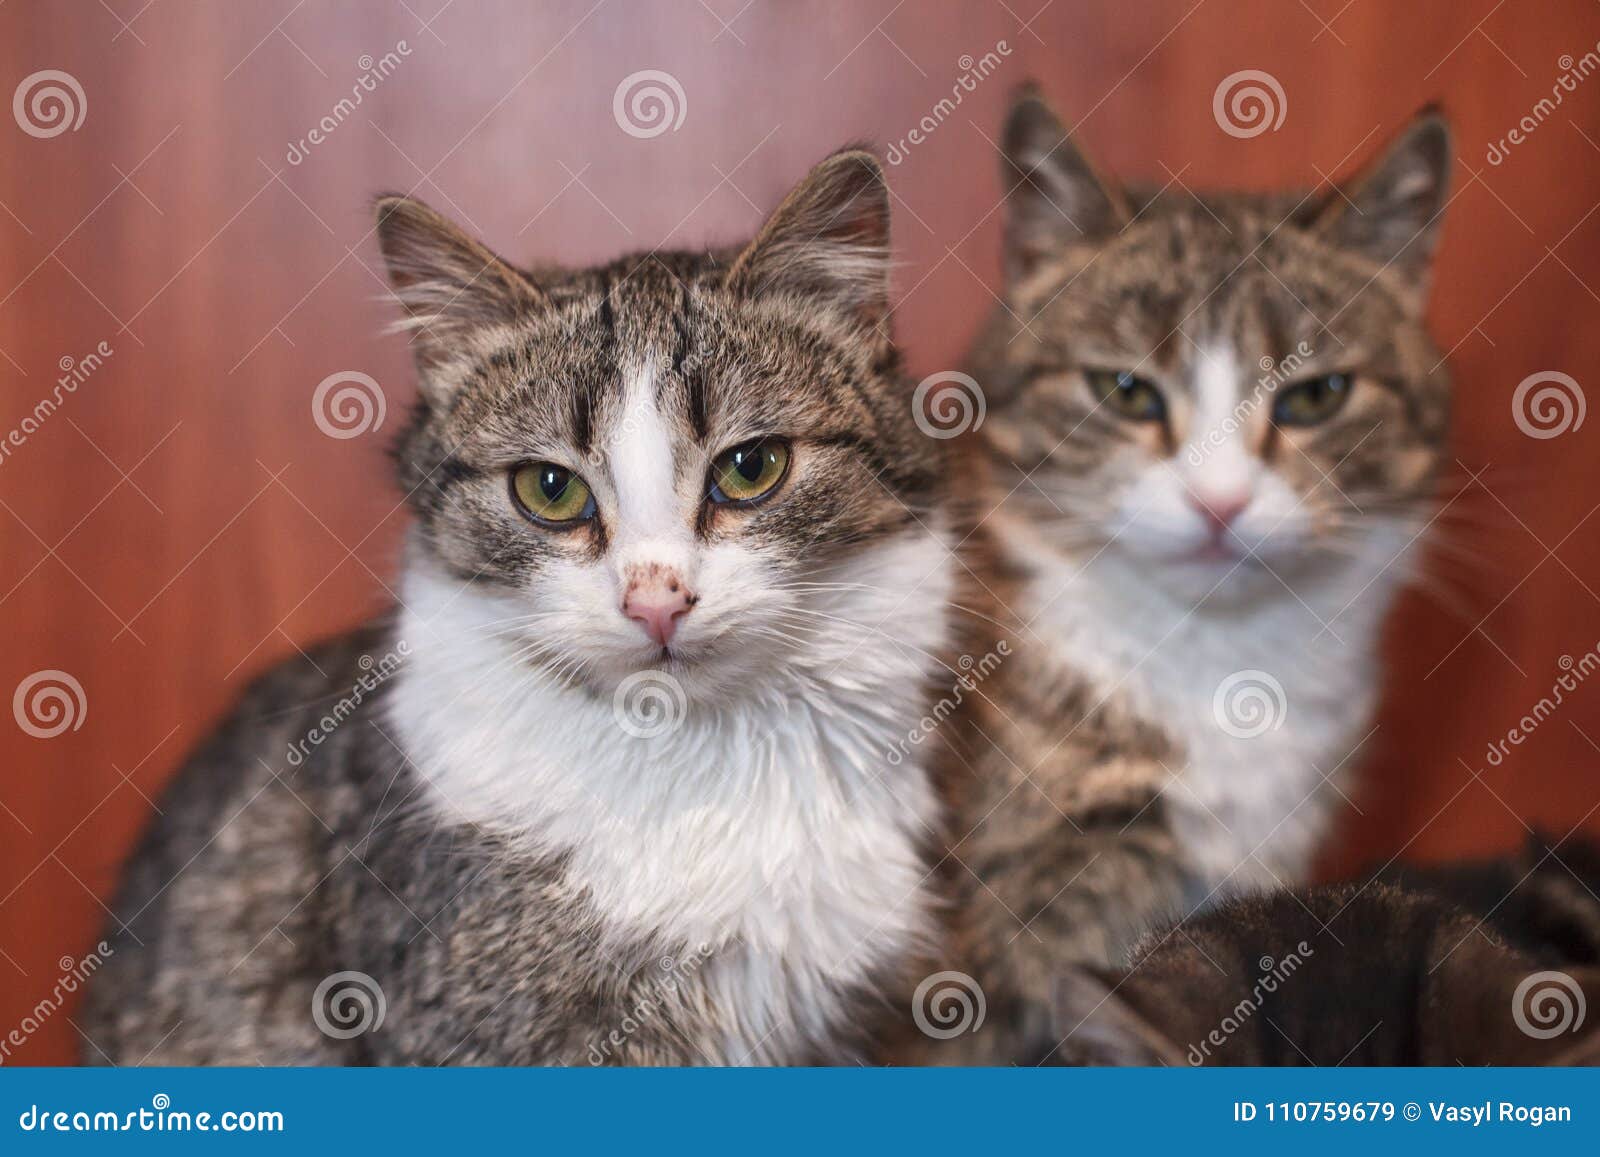 Two Cats Together Indoors Shelter. Stock Image - Image of trio, loving ...